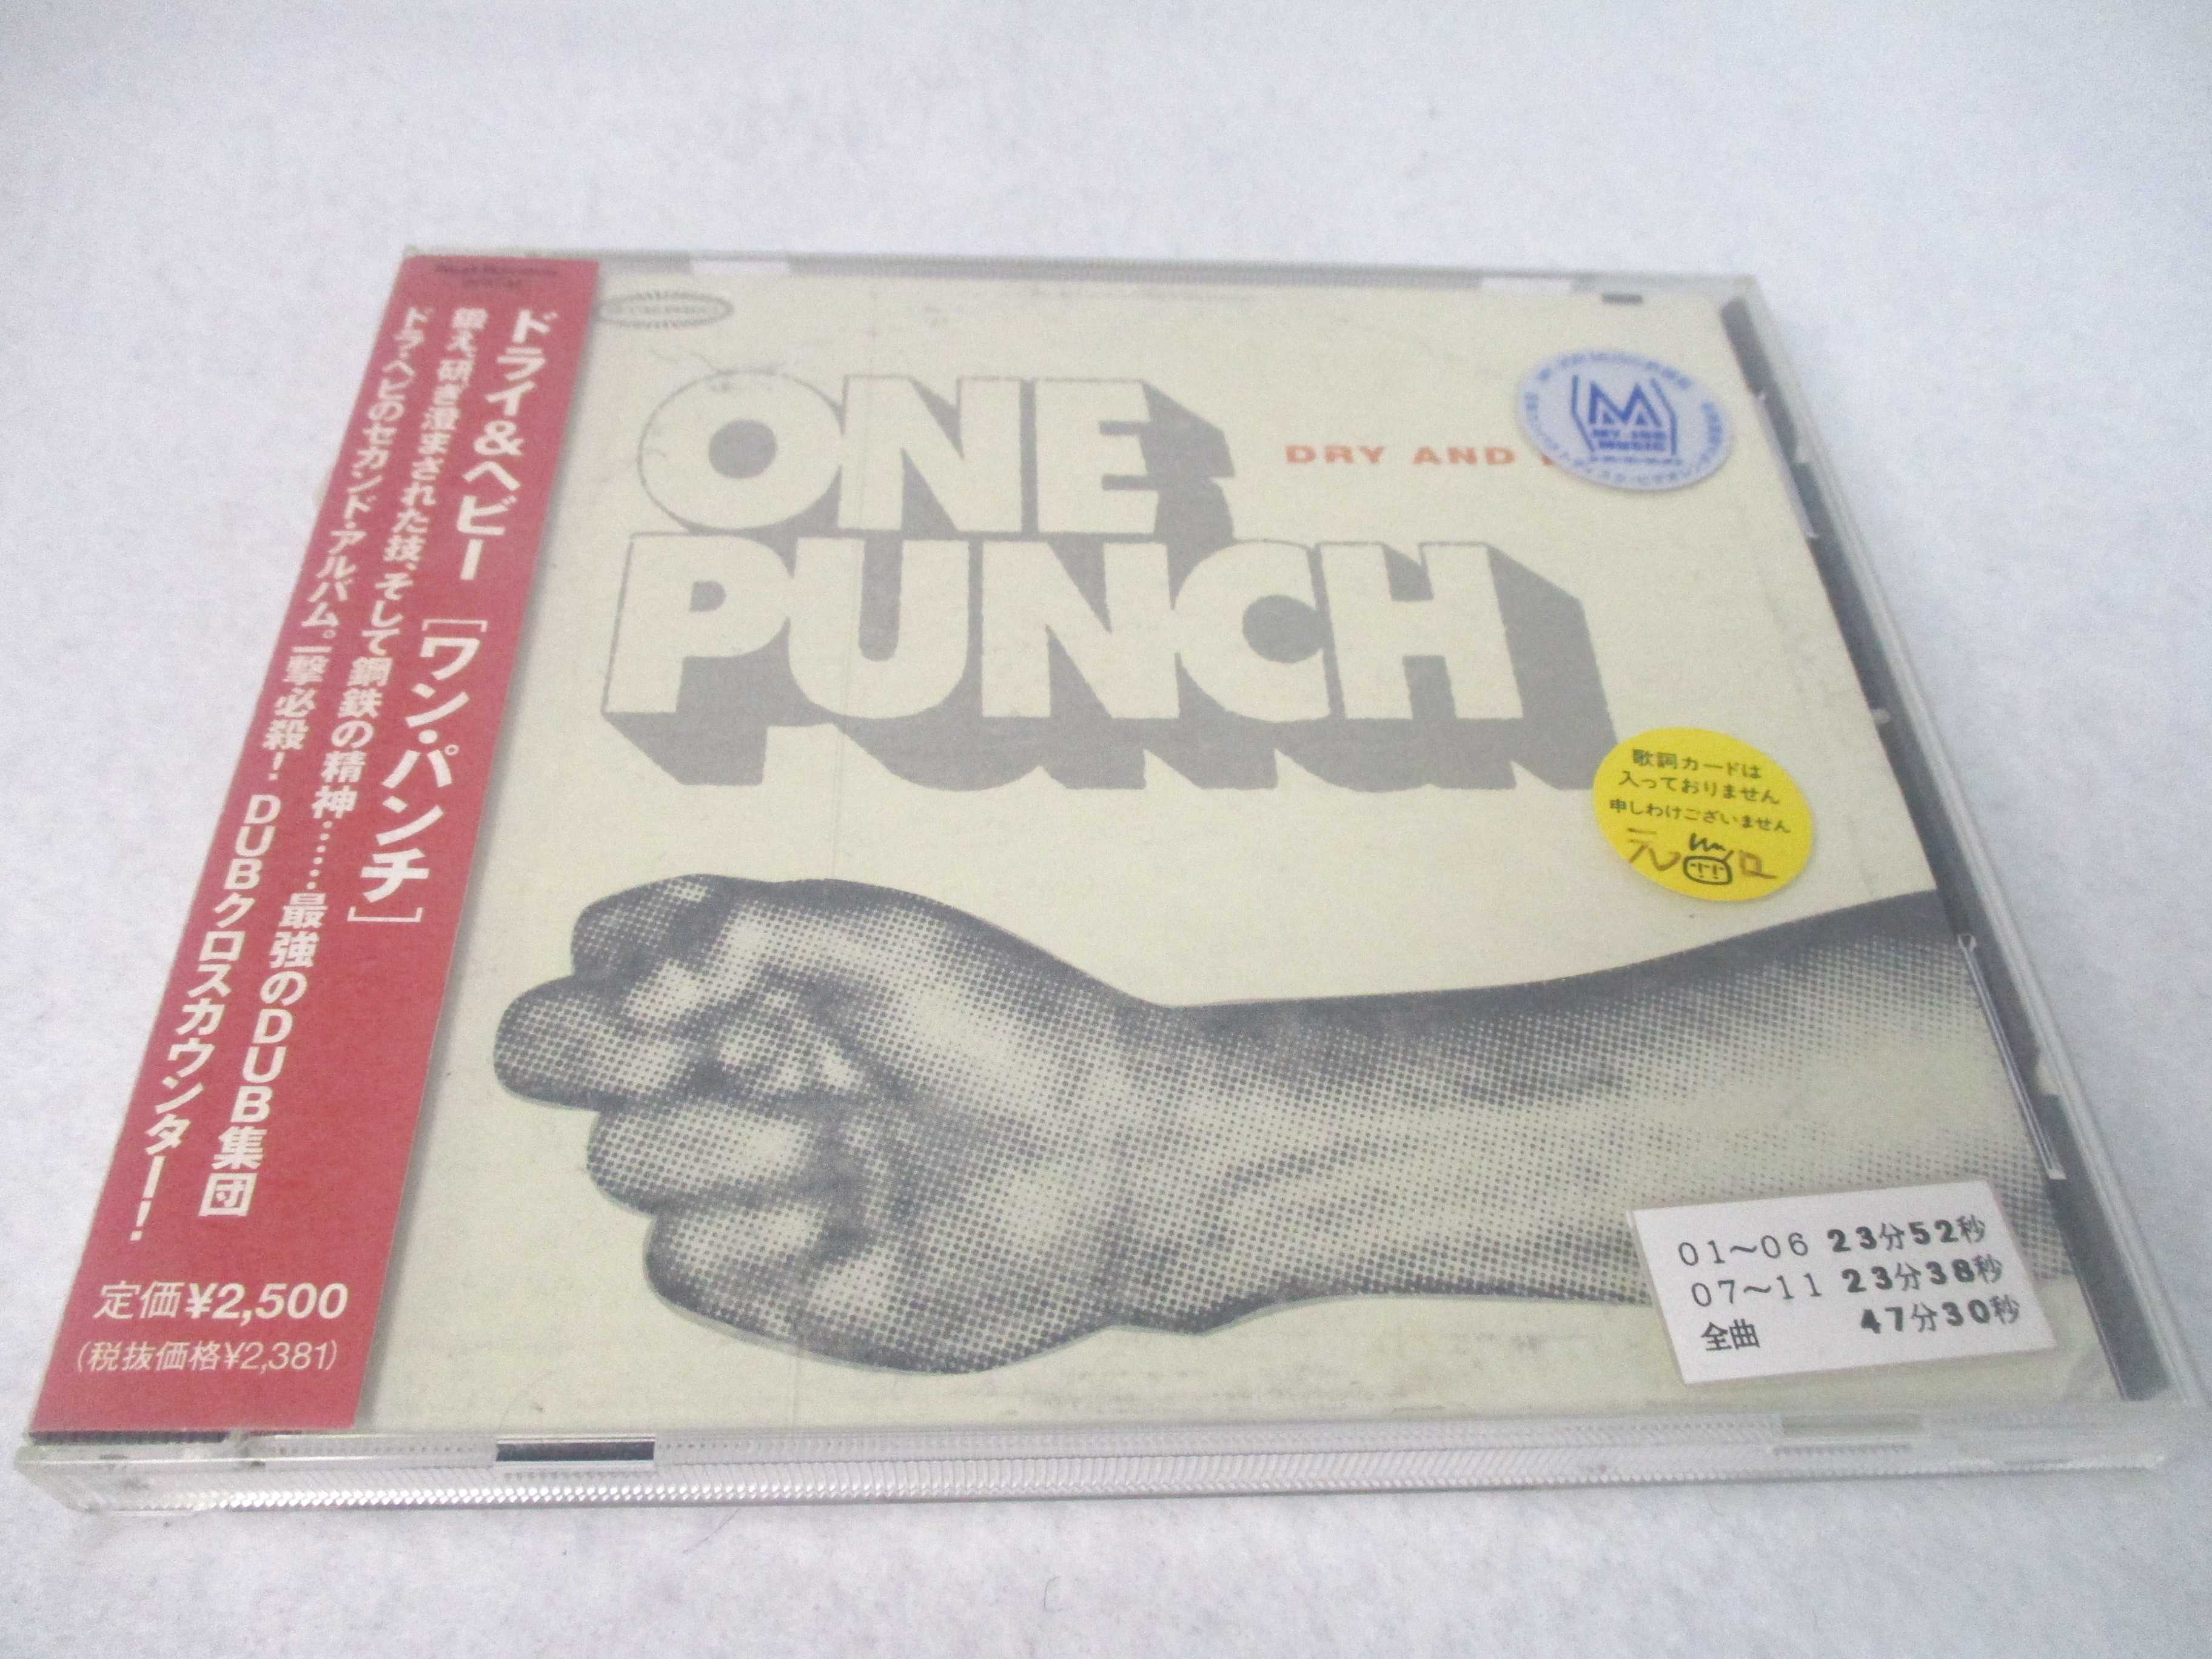 AC07135 yÁz yCDz ONE PUNCH/DRY AND HEAVY